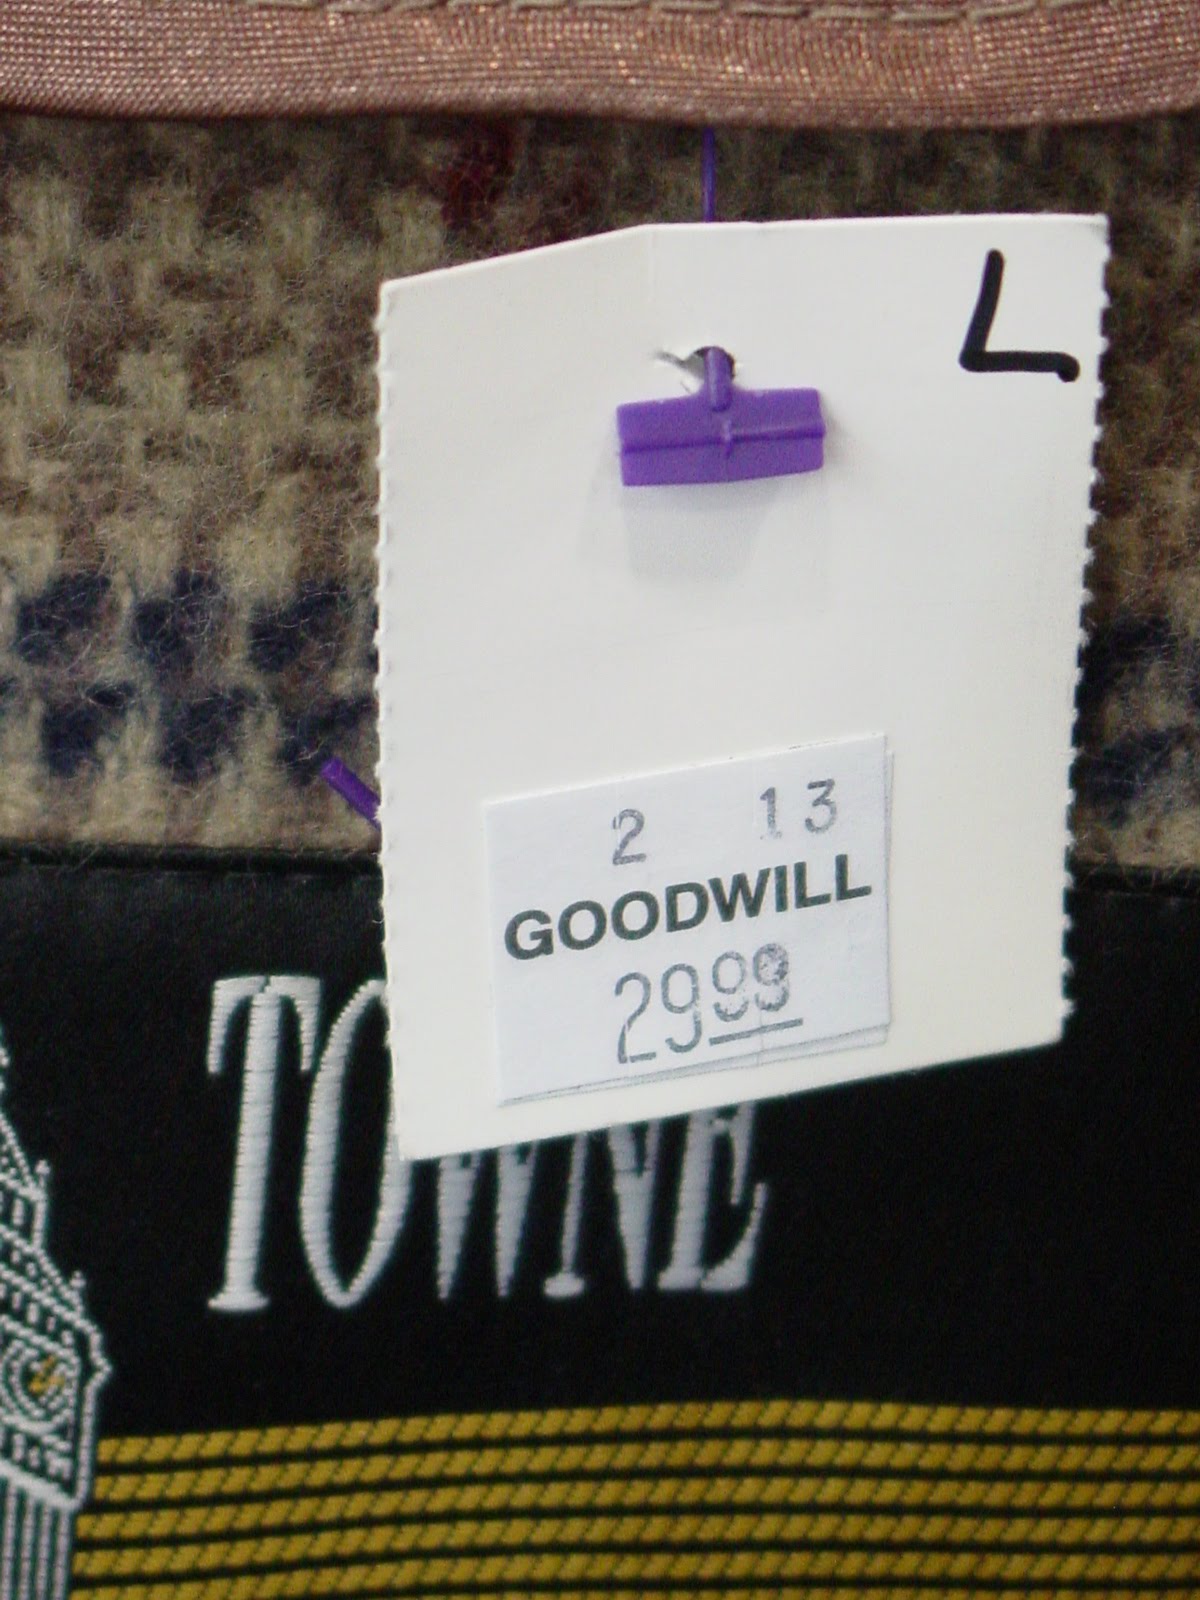 Is Goodwill Too Expensive?